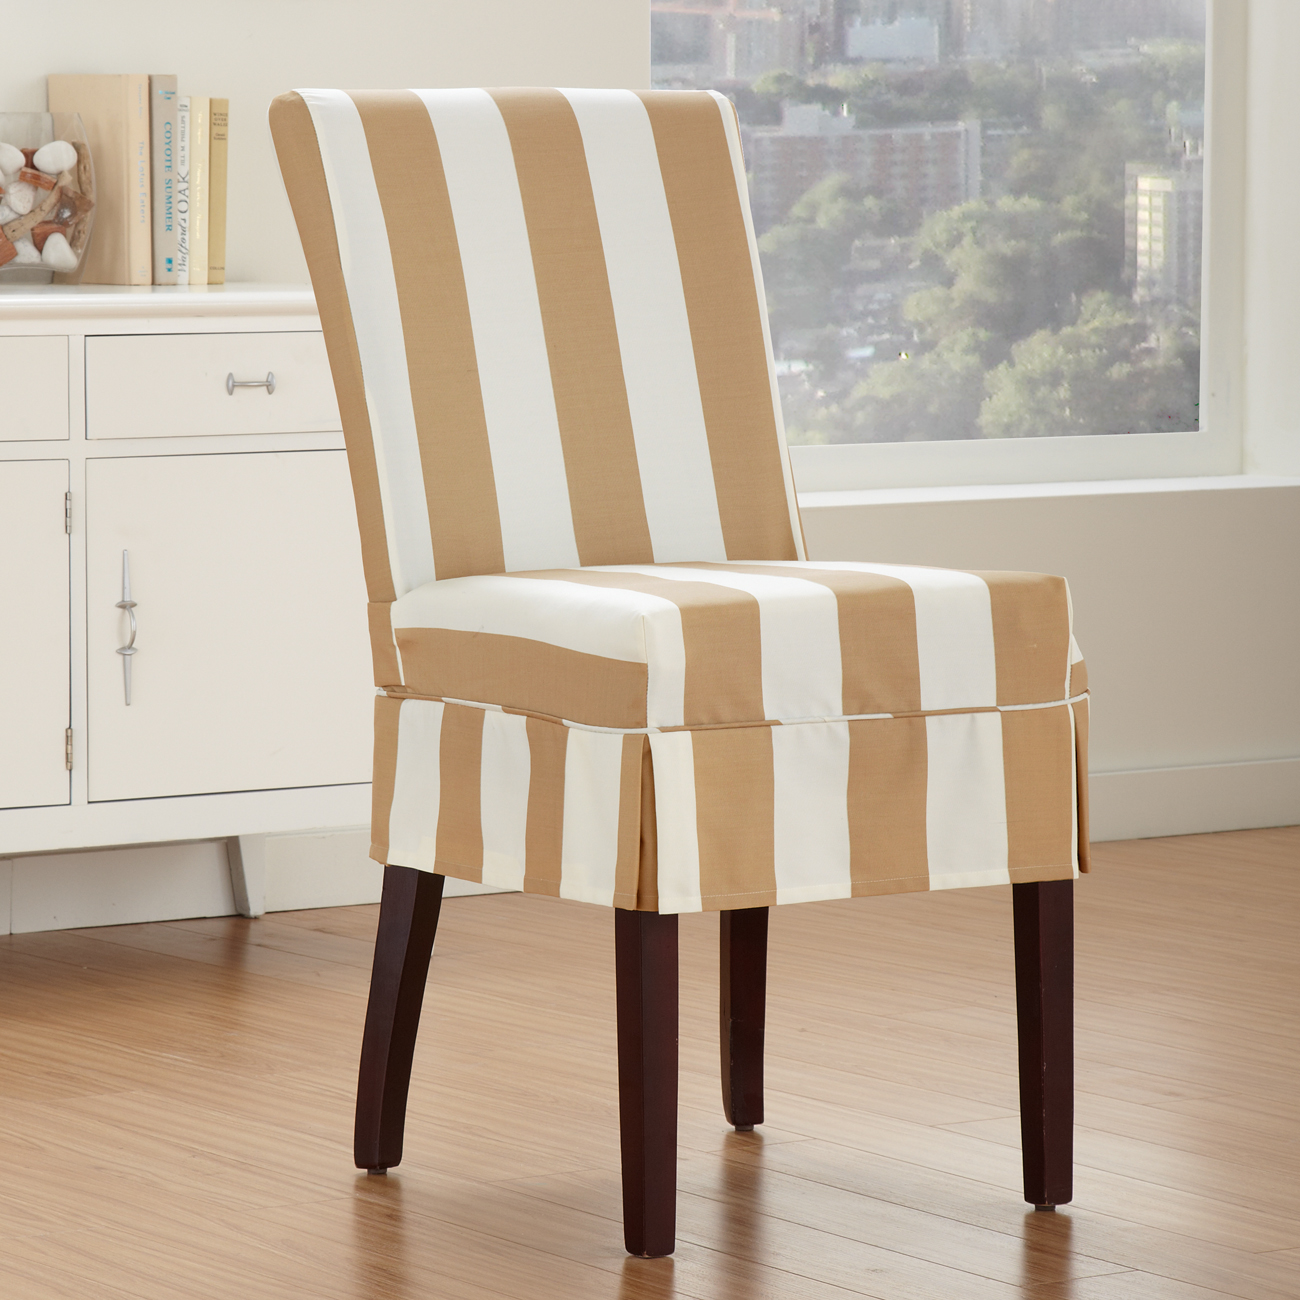 dining chairs slip covers photo - 1